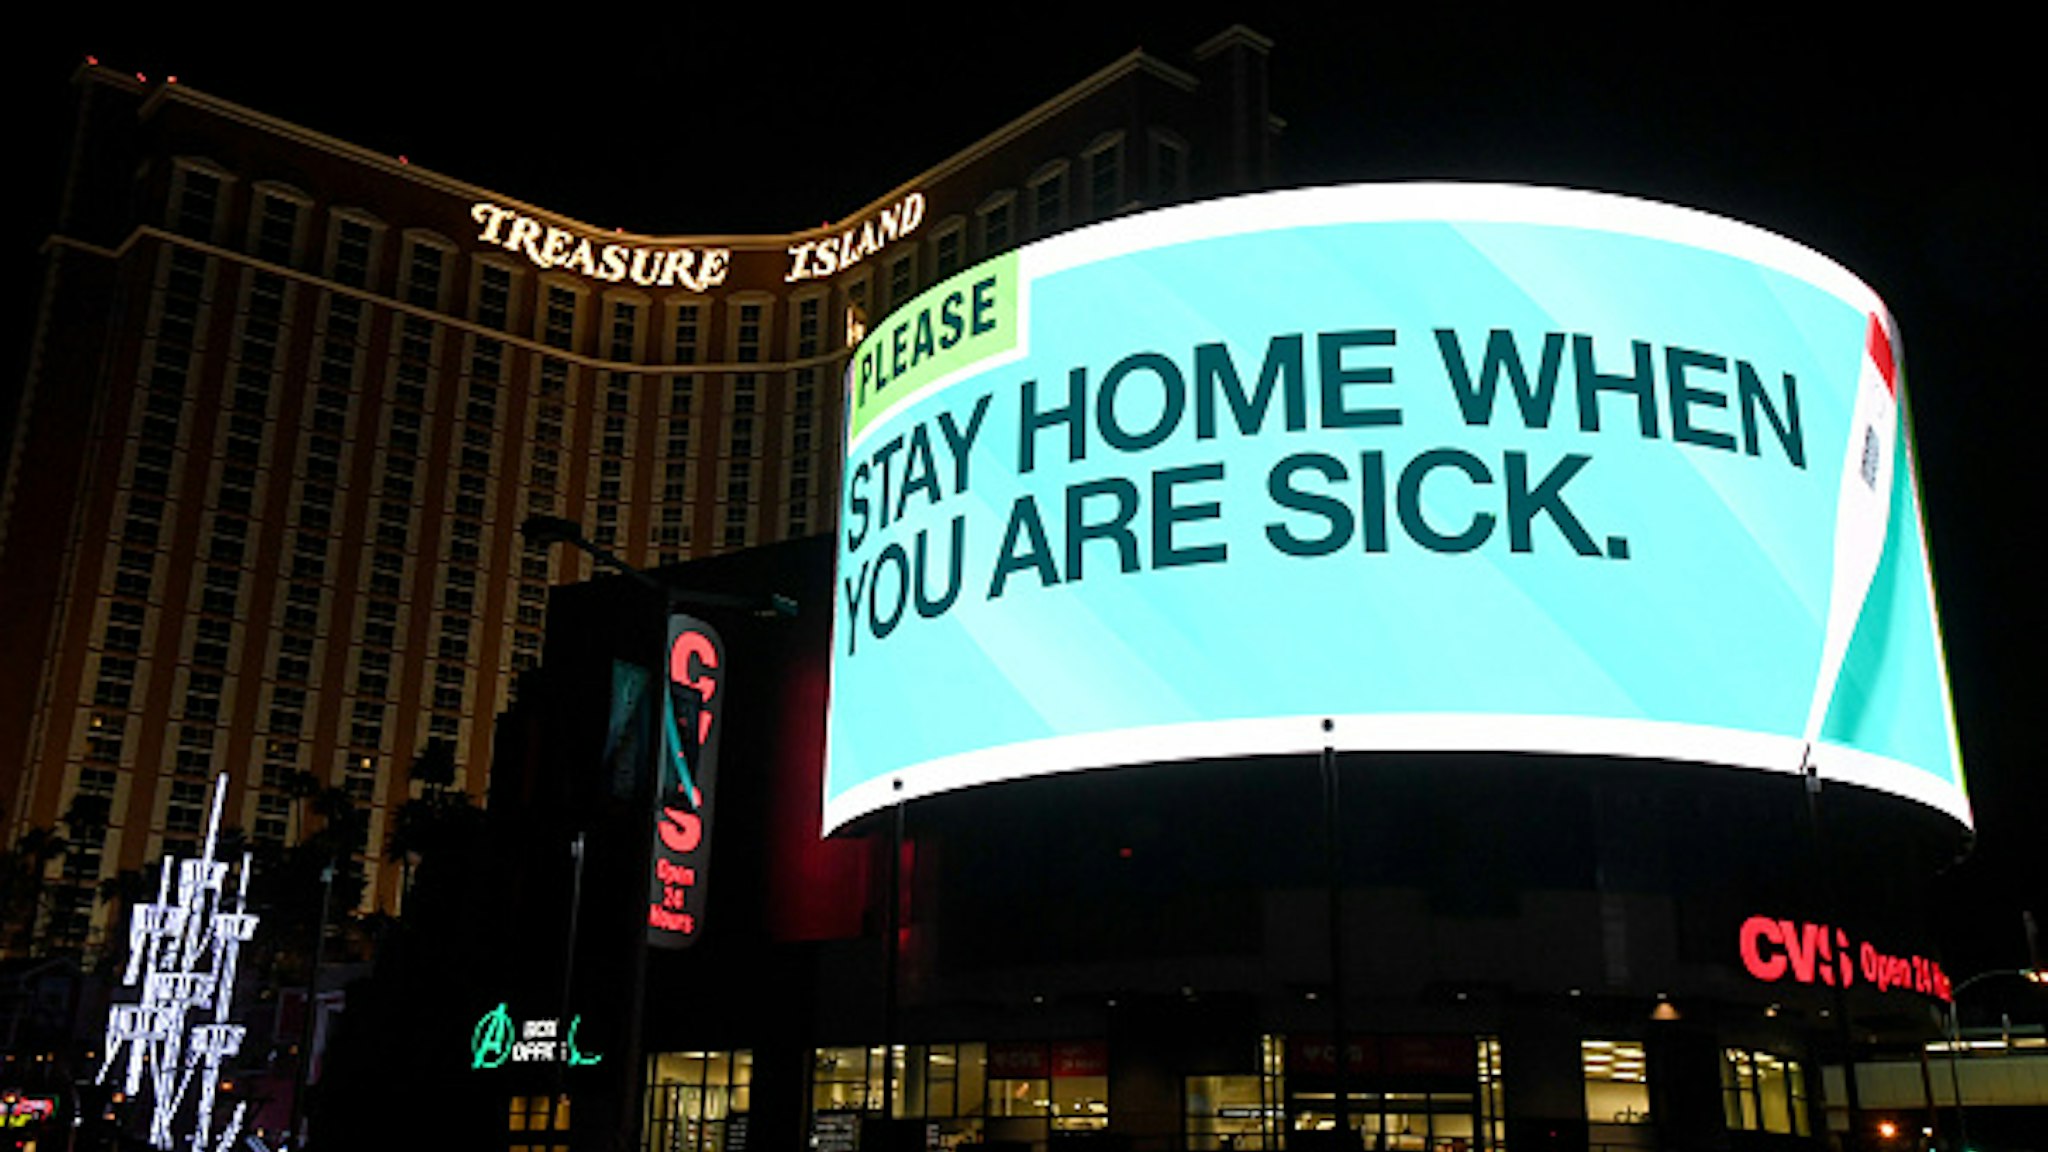 A digital sign above a CVS Pharmacy at the shuttered Treasure Island Hotel &amp; Casino on the Las Vegas Strip displays the message "Please stay home when you are sick" due to the continuing spread of the coronavirus across the United States on March 28, 2020 in Las Vegas, Nevada. On March 20th, Nevada Gov. Steve Sisolak ordered a mandatory shutdown of most nonessential businesses in the state until April 16th to help combat the spread of the virus. The World Health Organization declared the coronavirus (COVID-19) a global pandemic on March 11th.